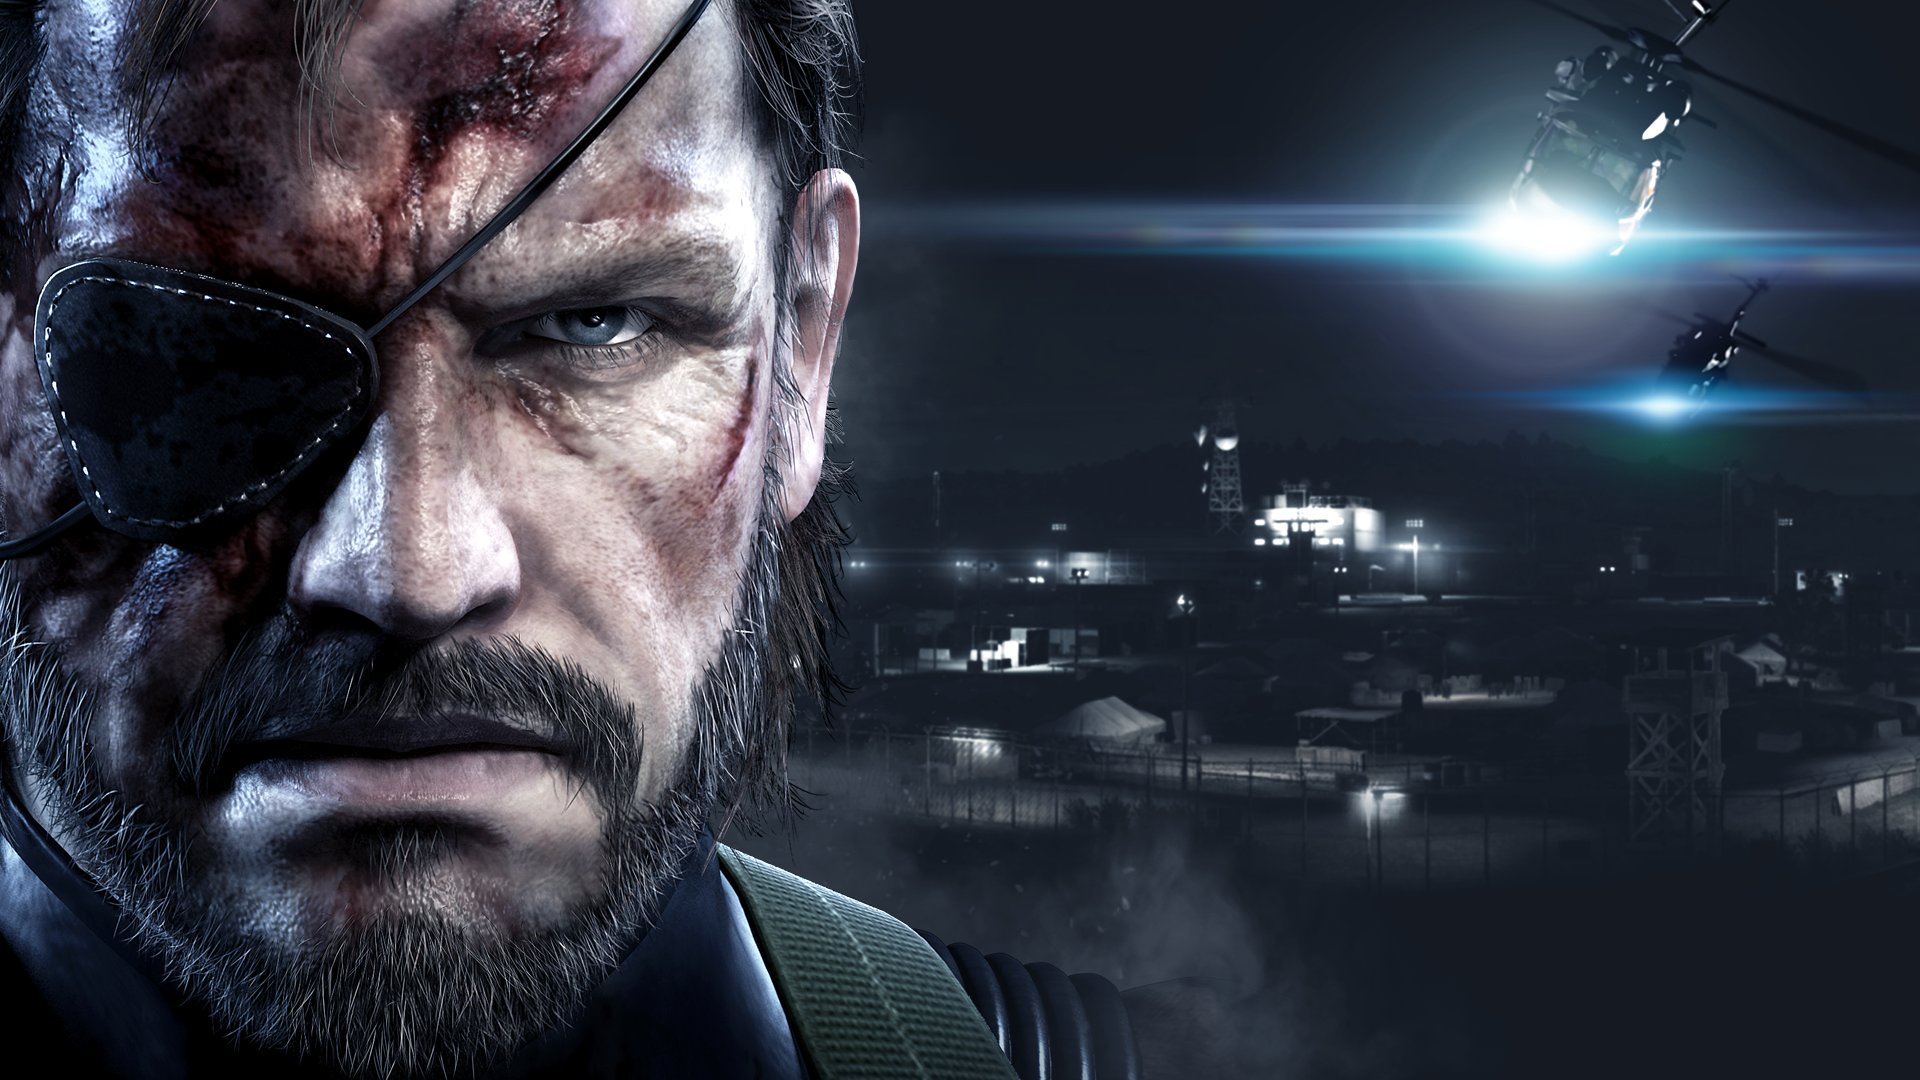 Metal Gear Solid V Ground Zeroes Wallpaper